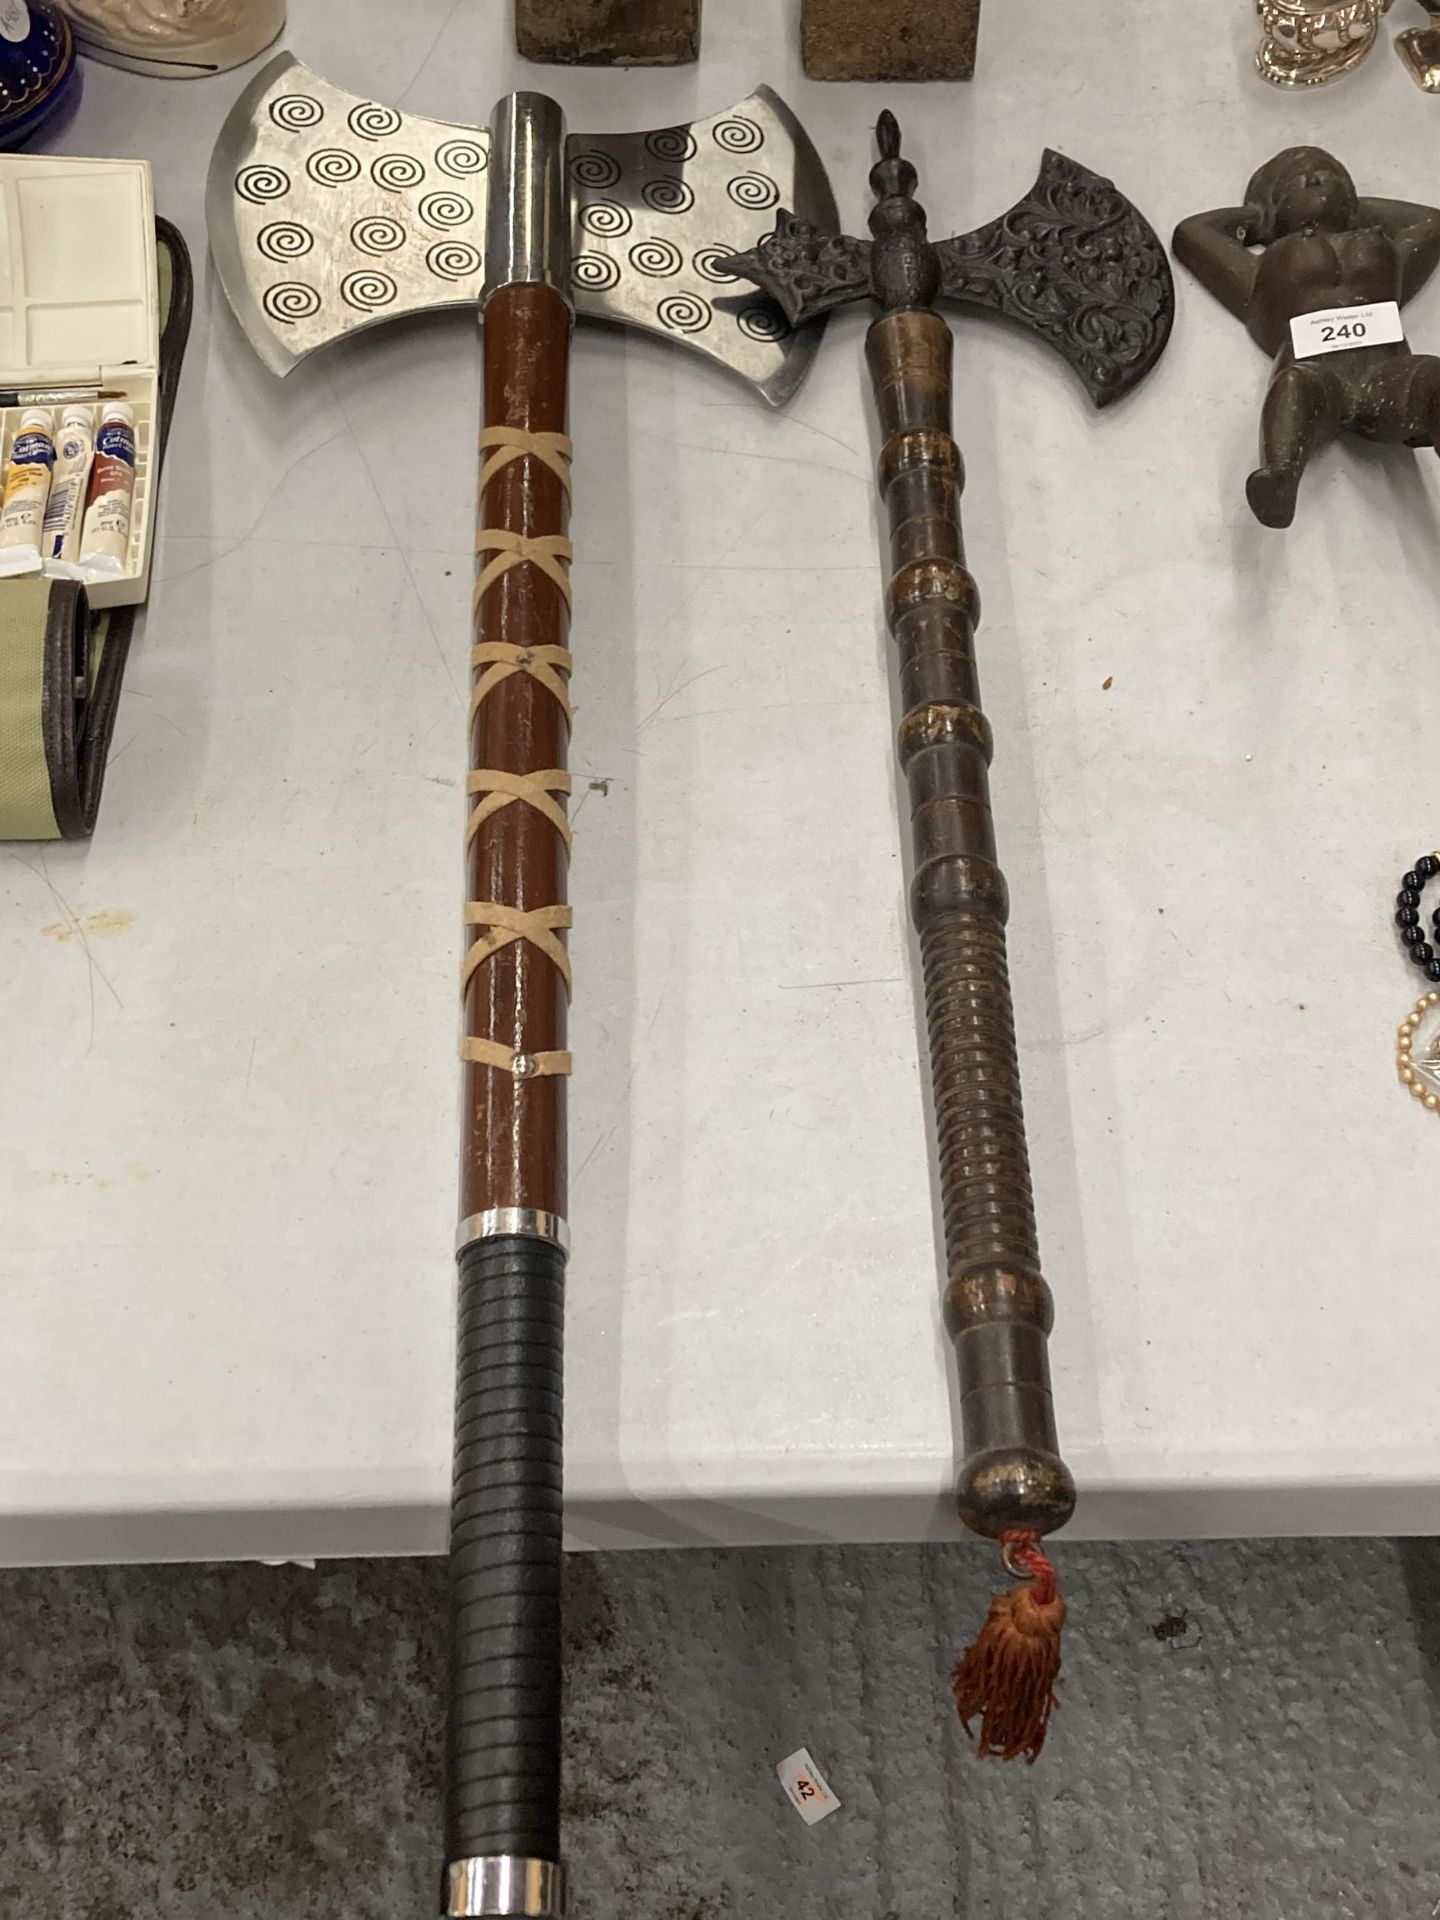 TWO MEDIEVAL STYLE AXES